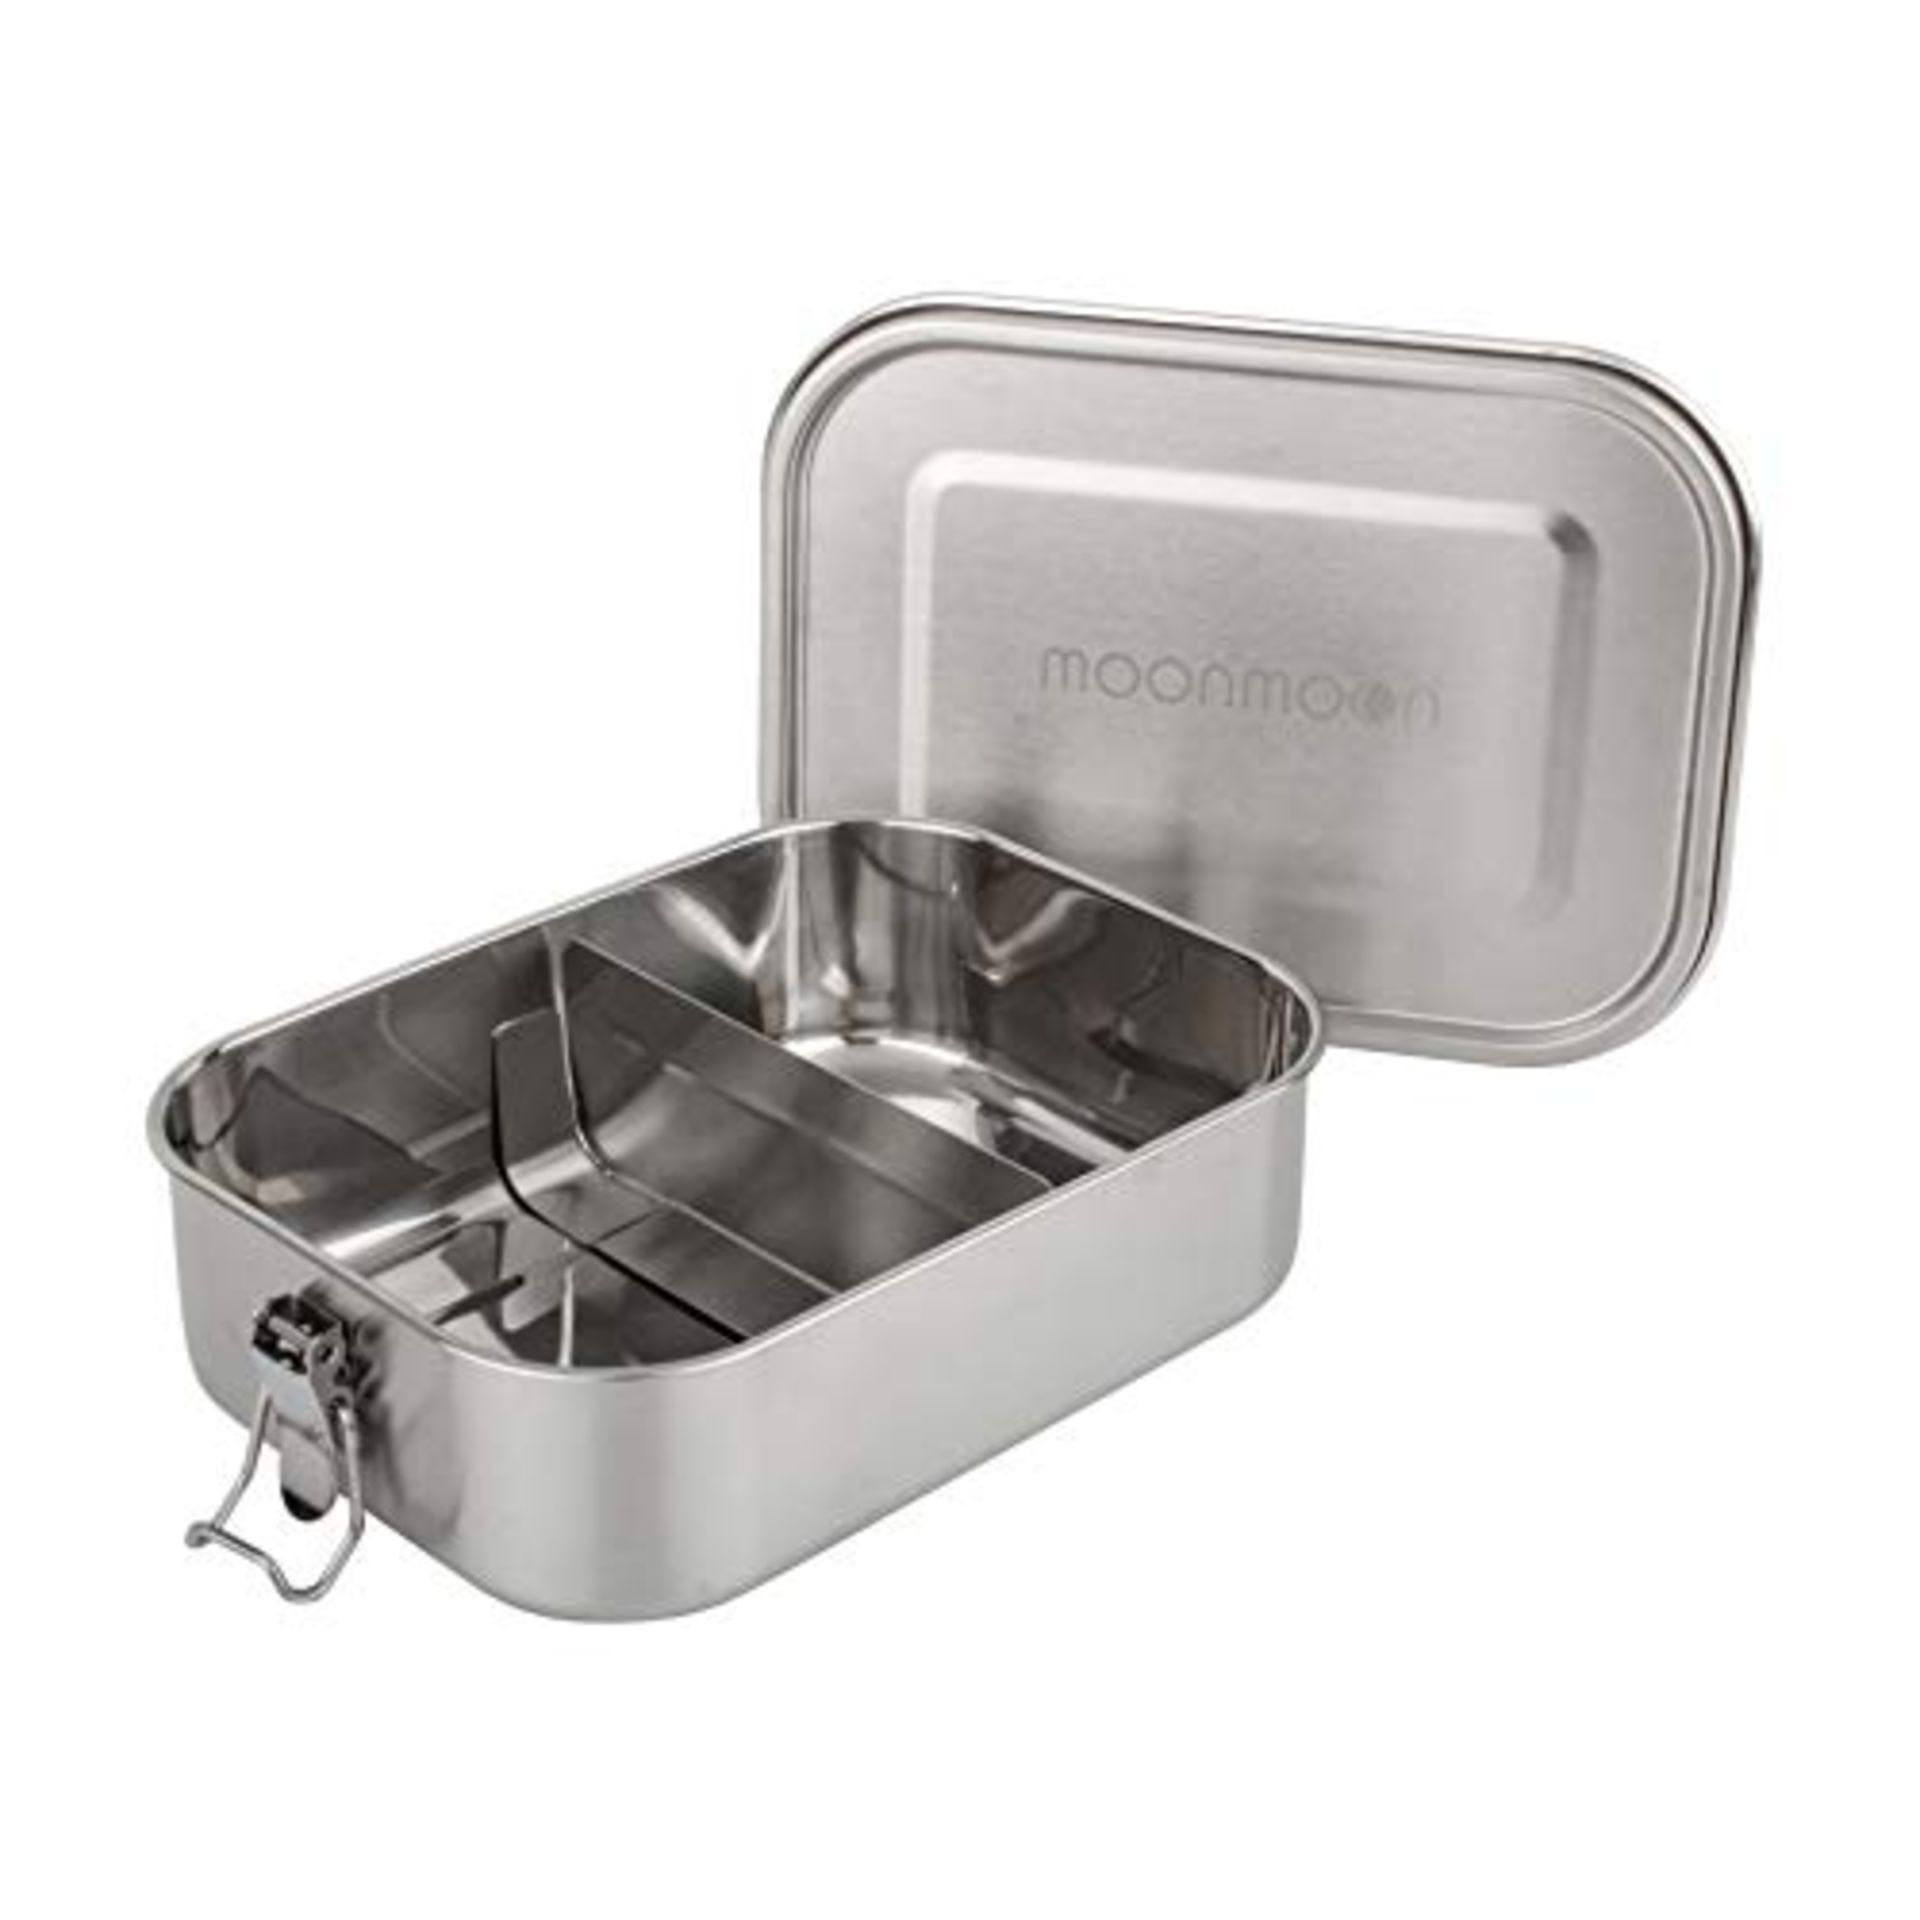 Moonmoon Stainless Steel Lunch Box | Eco-Friendly 1.2 Litre Leakproof Bento Box with c - Image 10 of 12